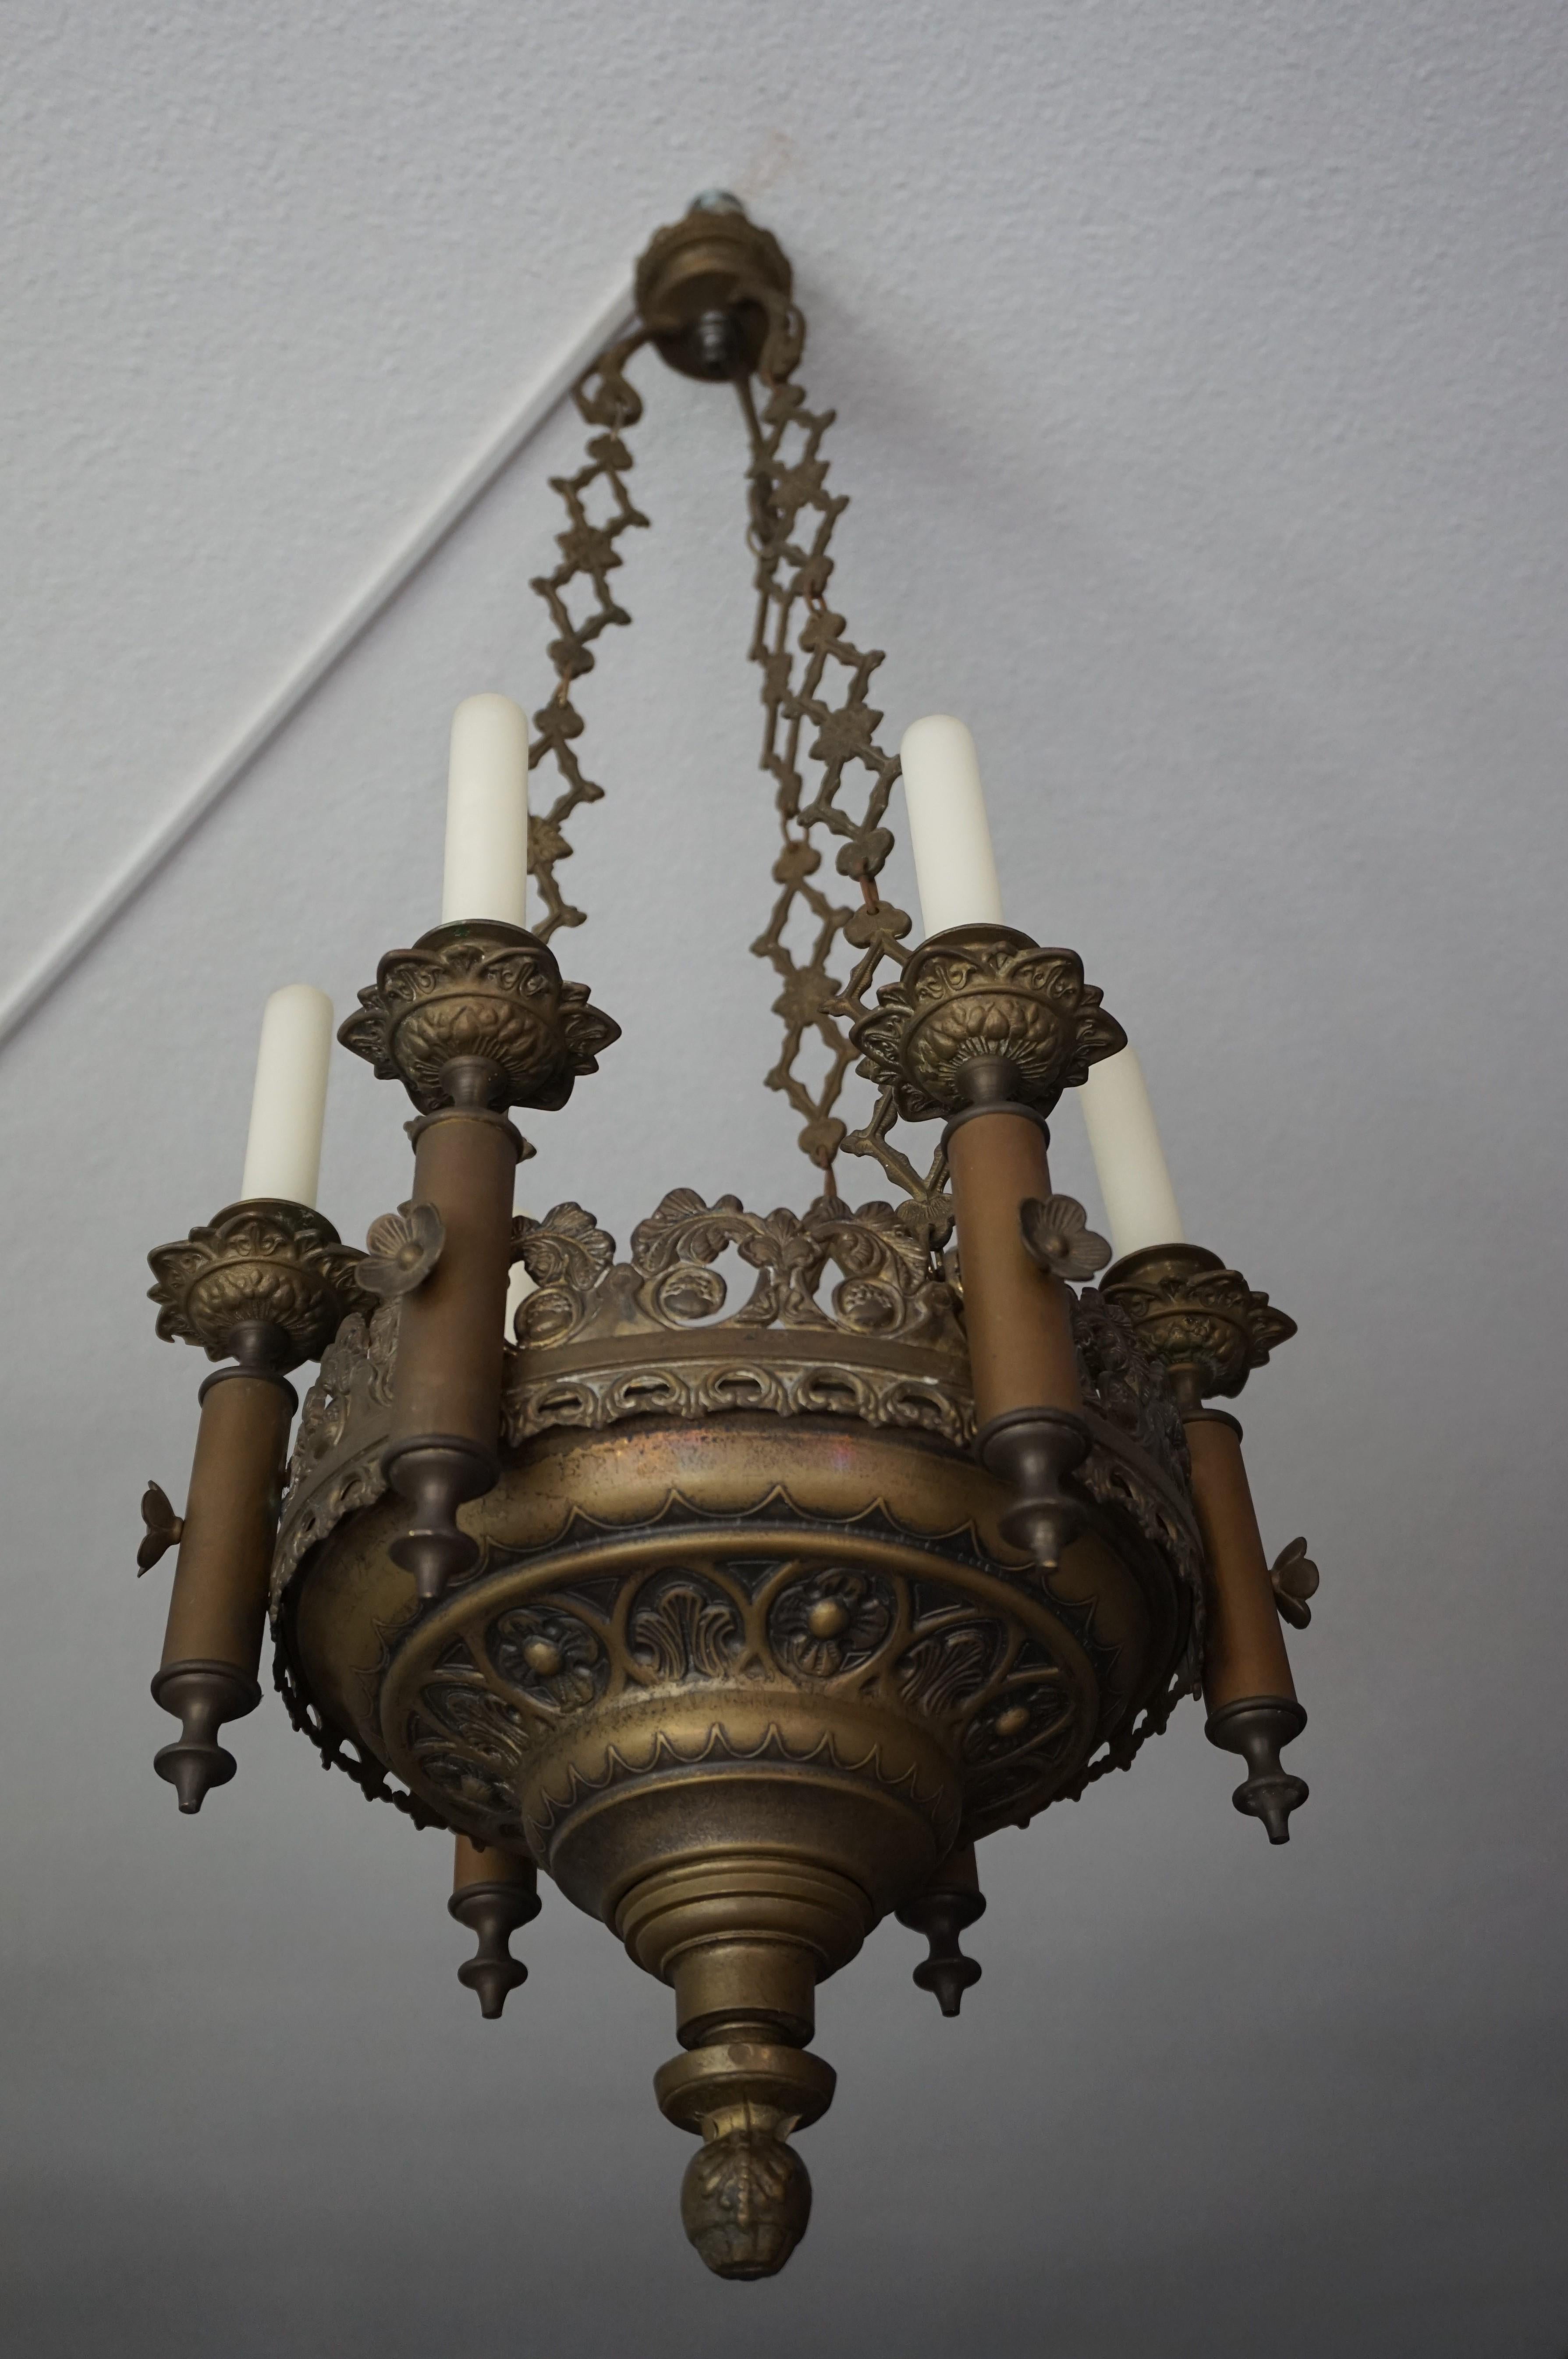 Beautiful and meaningful little work of religious art for a serene atmosphere.

This small size and compact church candle chandelier is perfect for creating a spiritual atmosphere. It comes with a number of stylized Gothic trefoil and quatrefoil